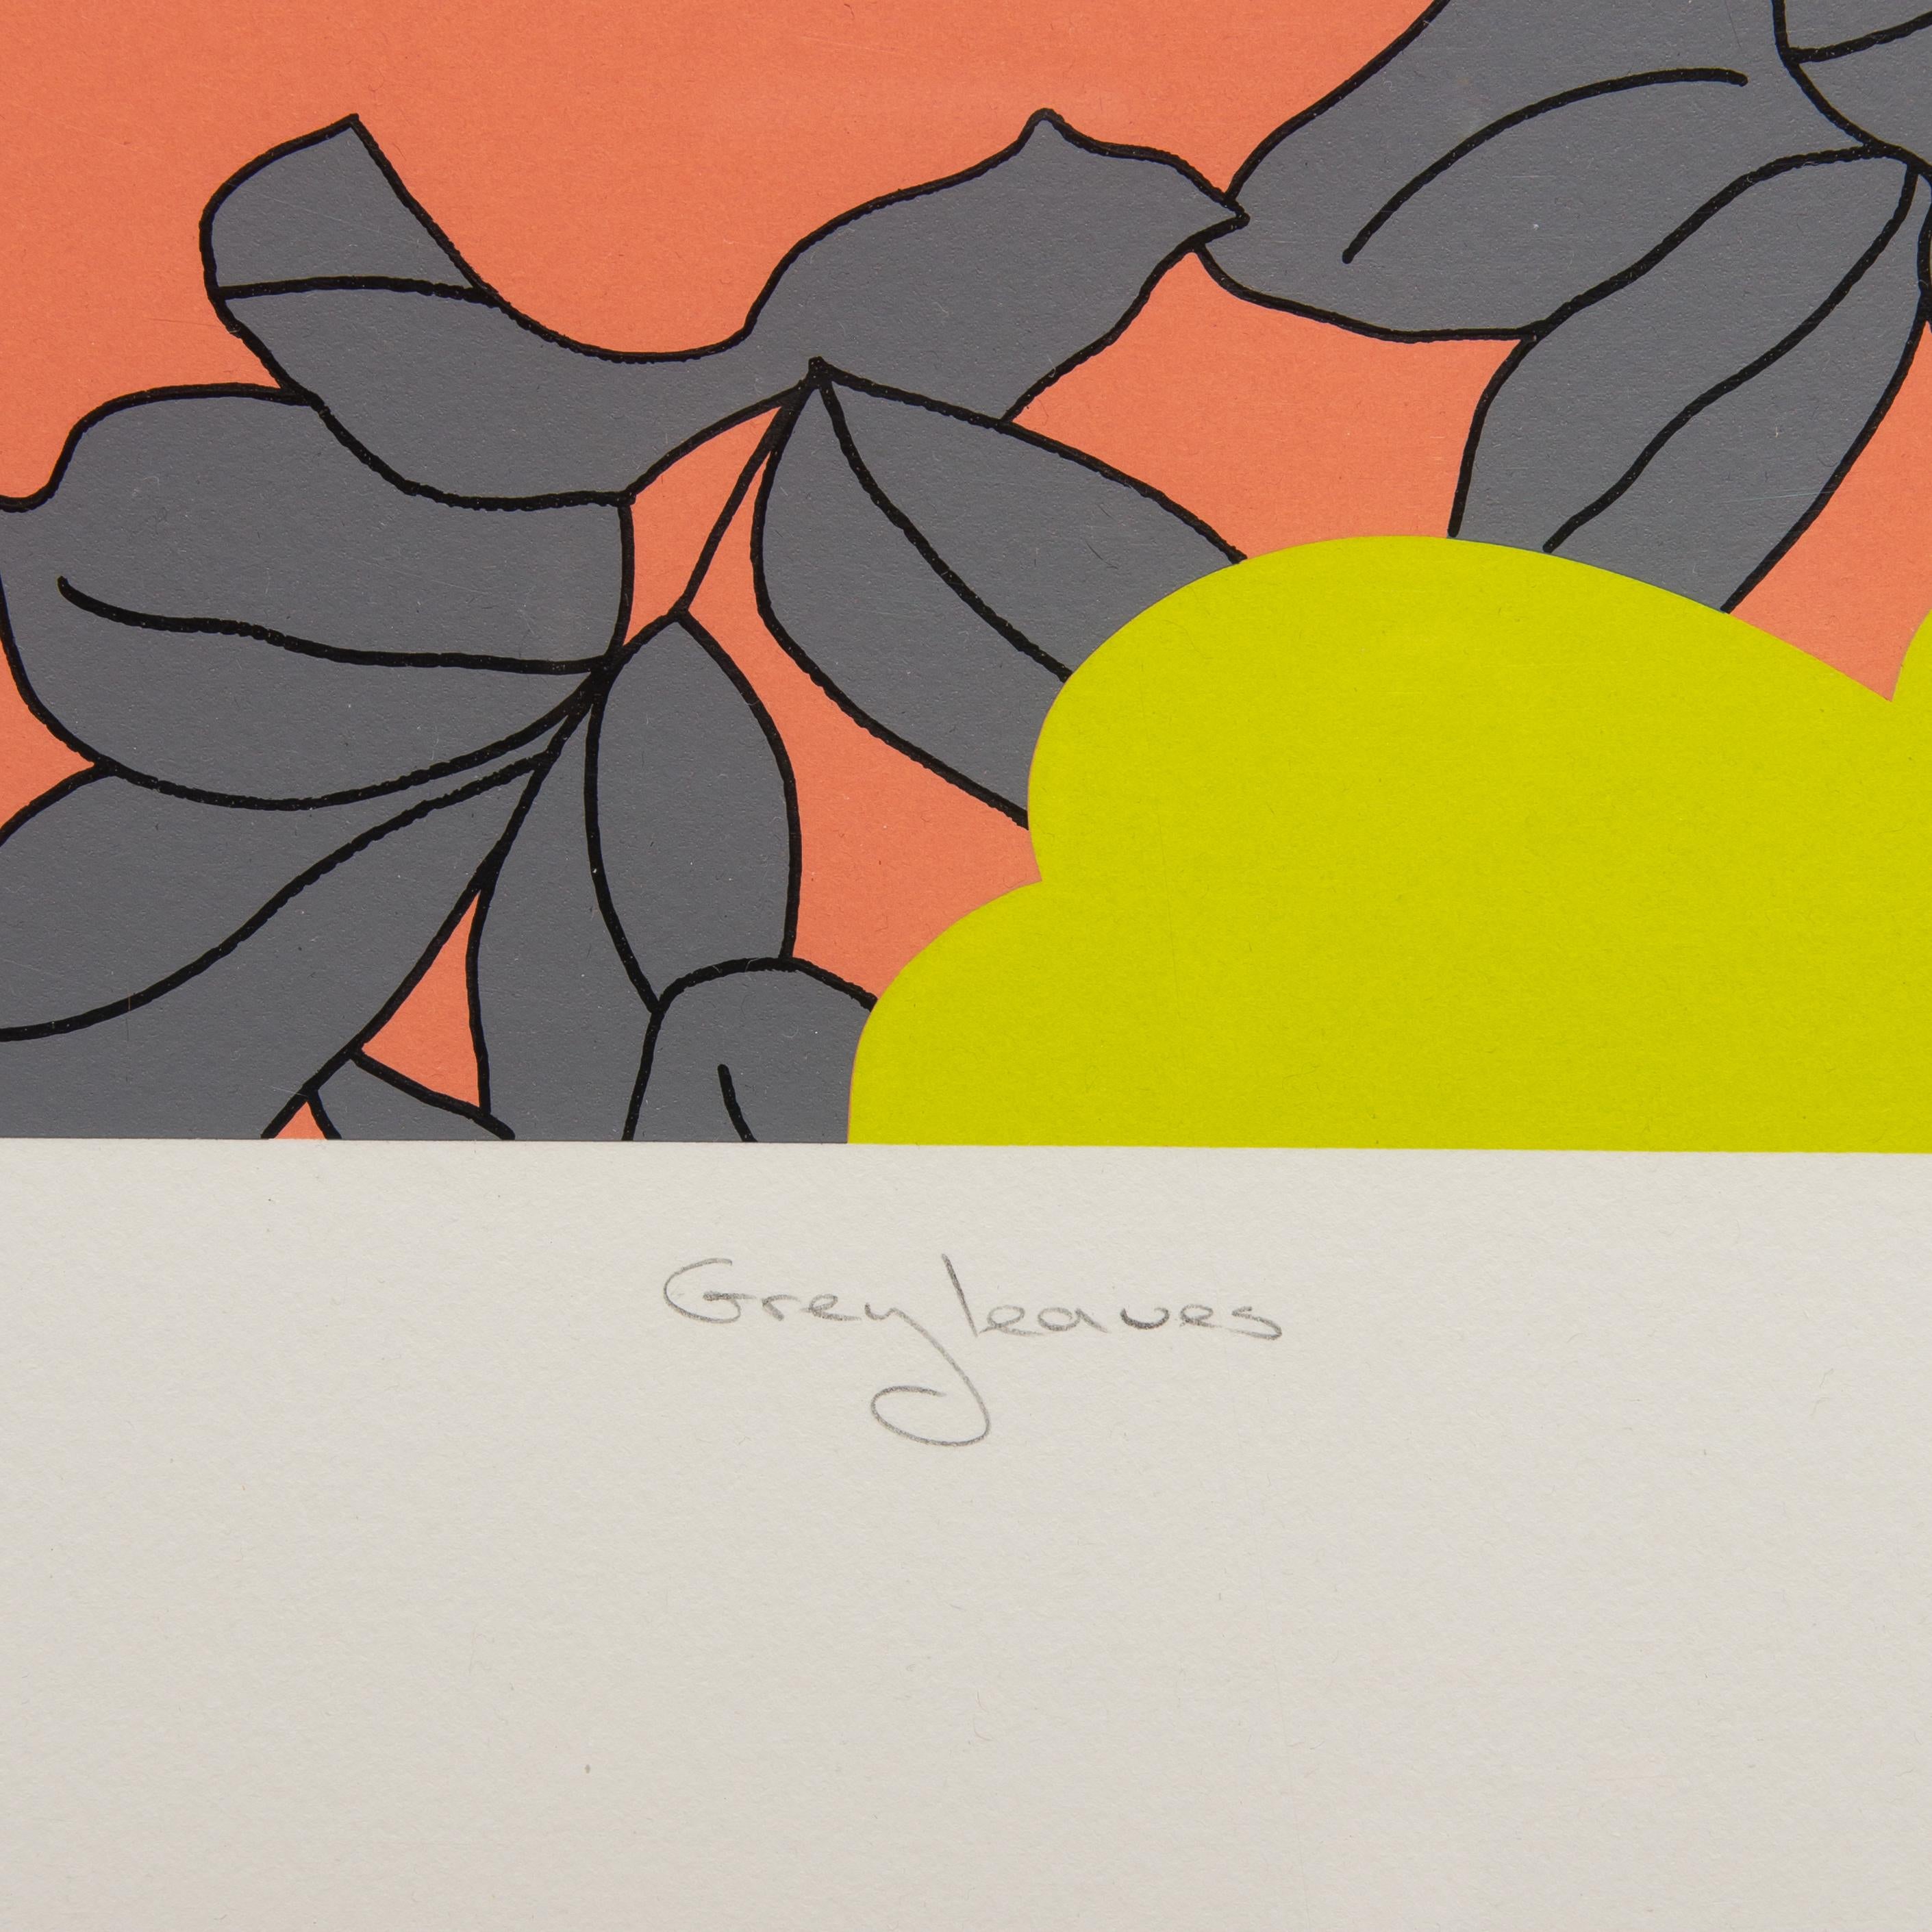 Grey Leaves - Contemporary Print by Gary Hume